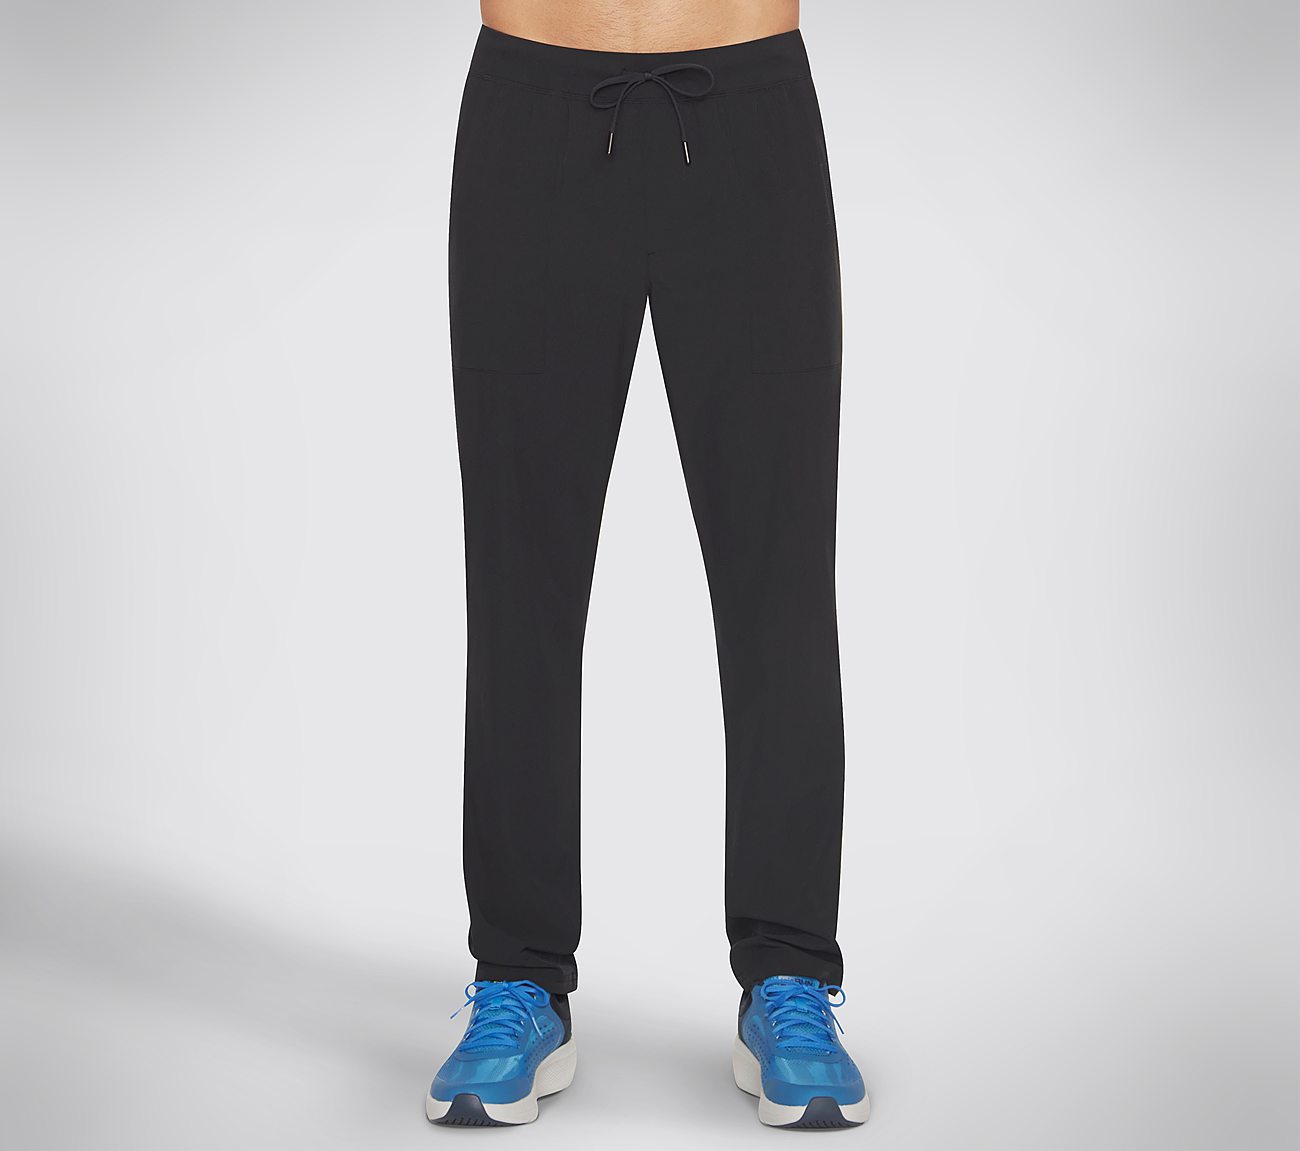 THE GOWALK PANT MOTION, BBBBLACK Apparels Lateral View